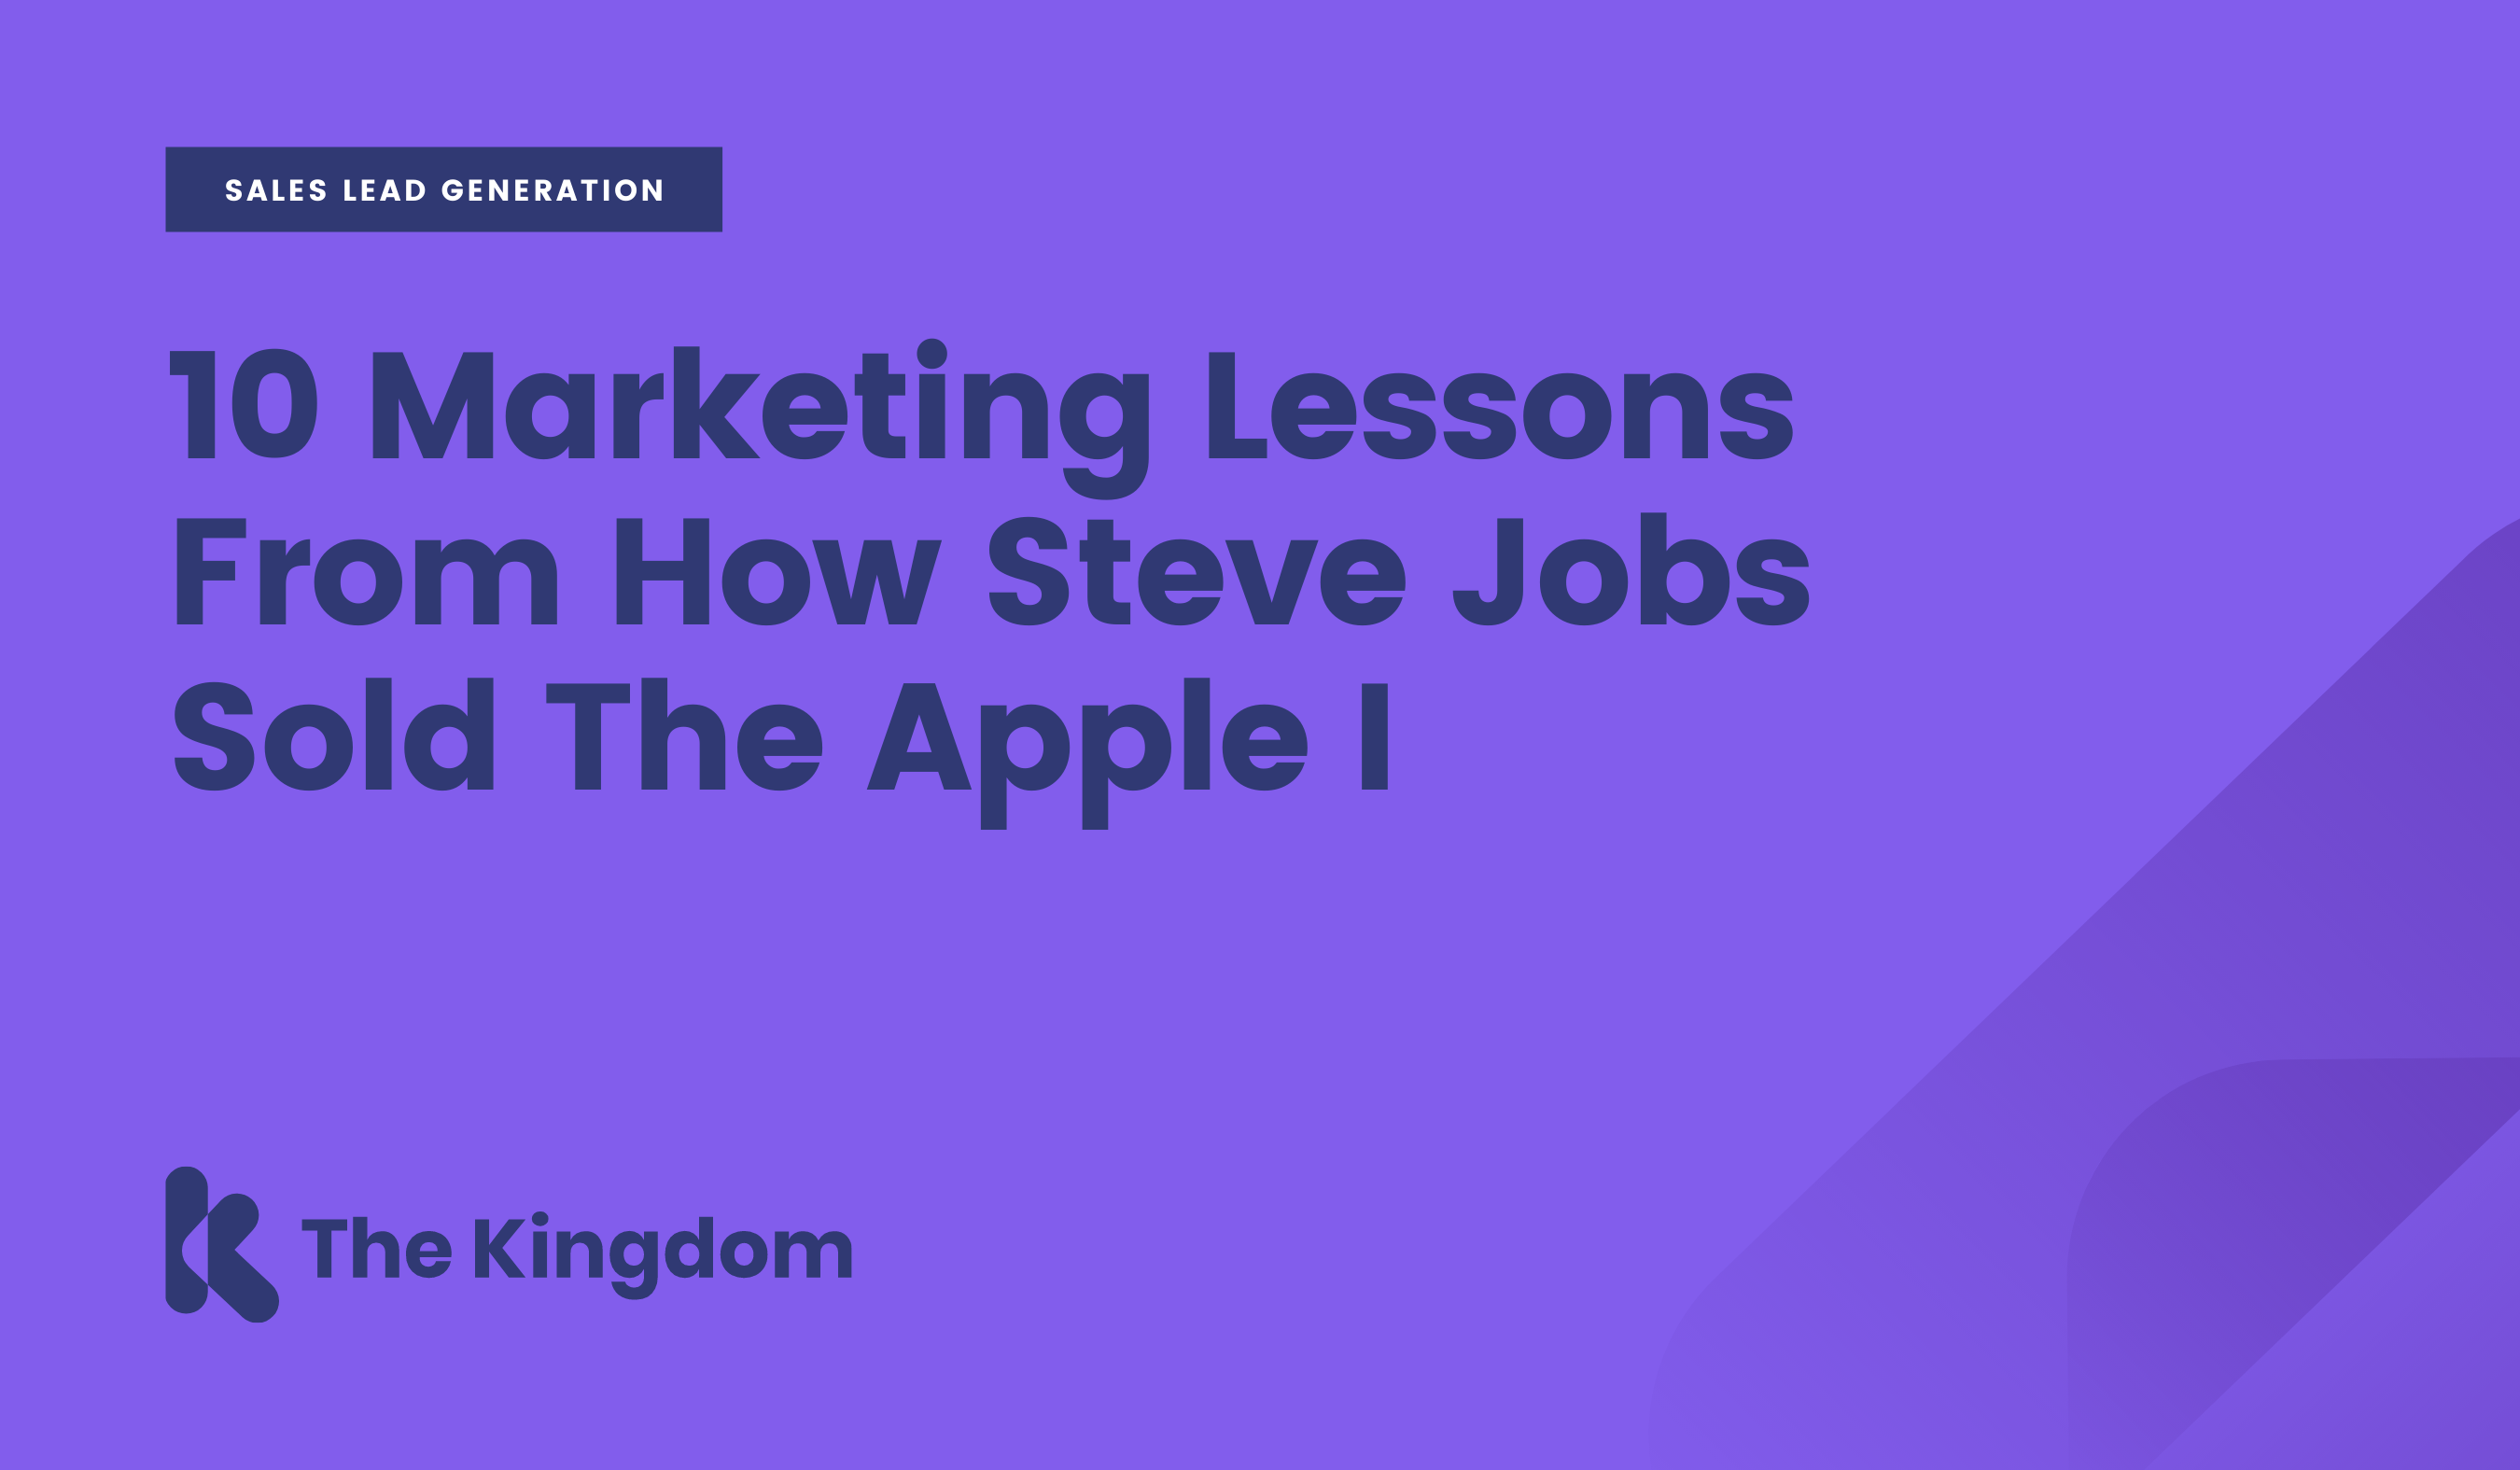 10 Marketing Lessons From How Steve Jobs Sold The Apple I.